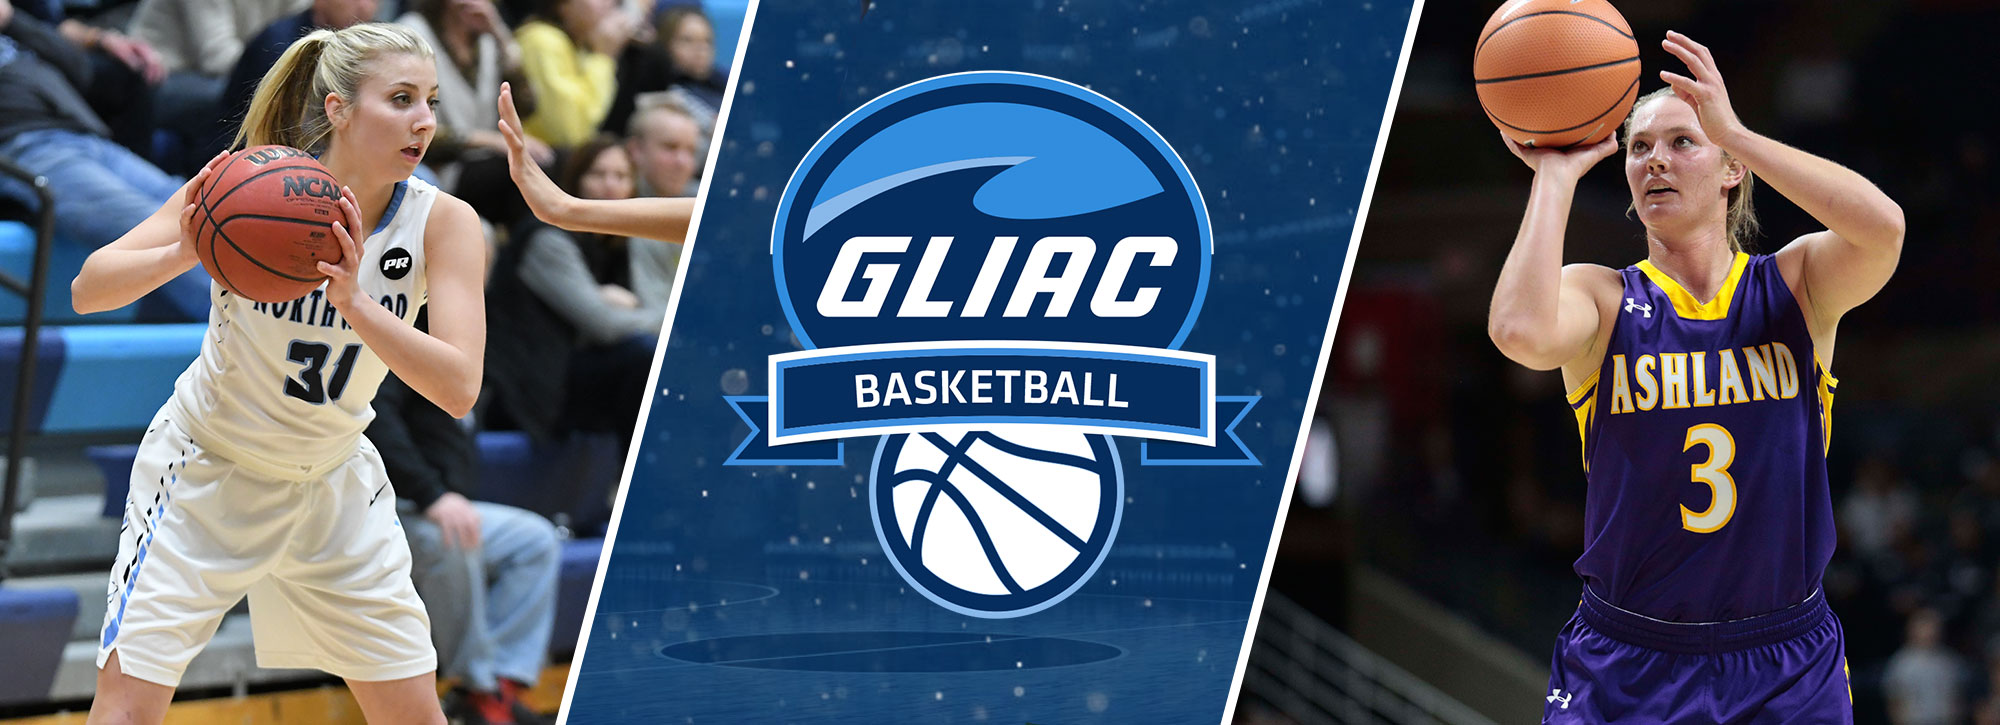 Ashland Posts 120 Points; Seeley's 29 Leads Northwood to Highlight #GLIACWBB Action